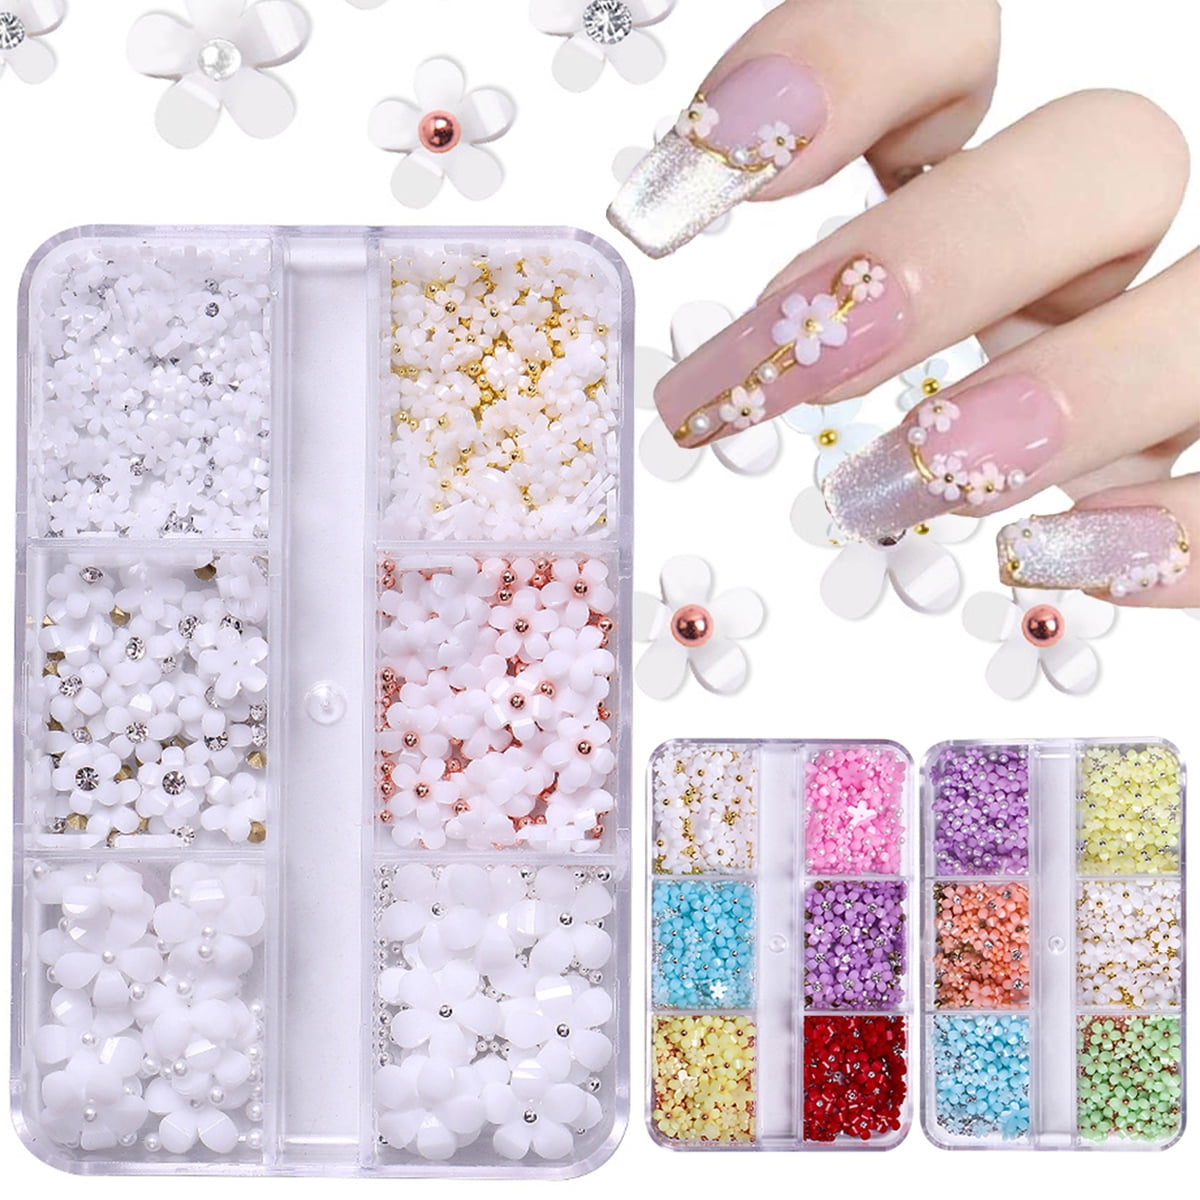 Fake Pearl Nail Charms Mini Heart Stars Nail Accessories Love Star White  Colourful Crafting Jewelry Pearl for Nails Decor DIY Supplies Packs 